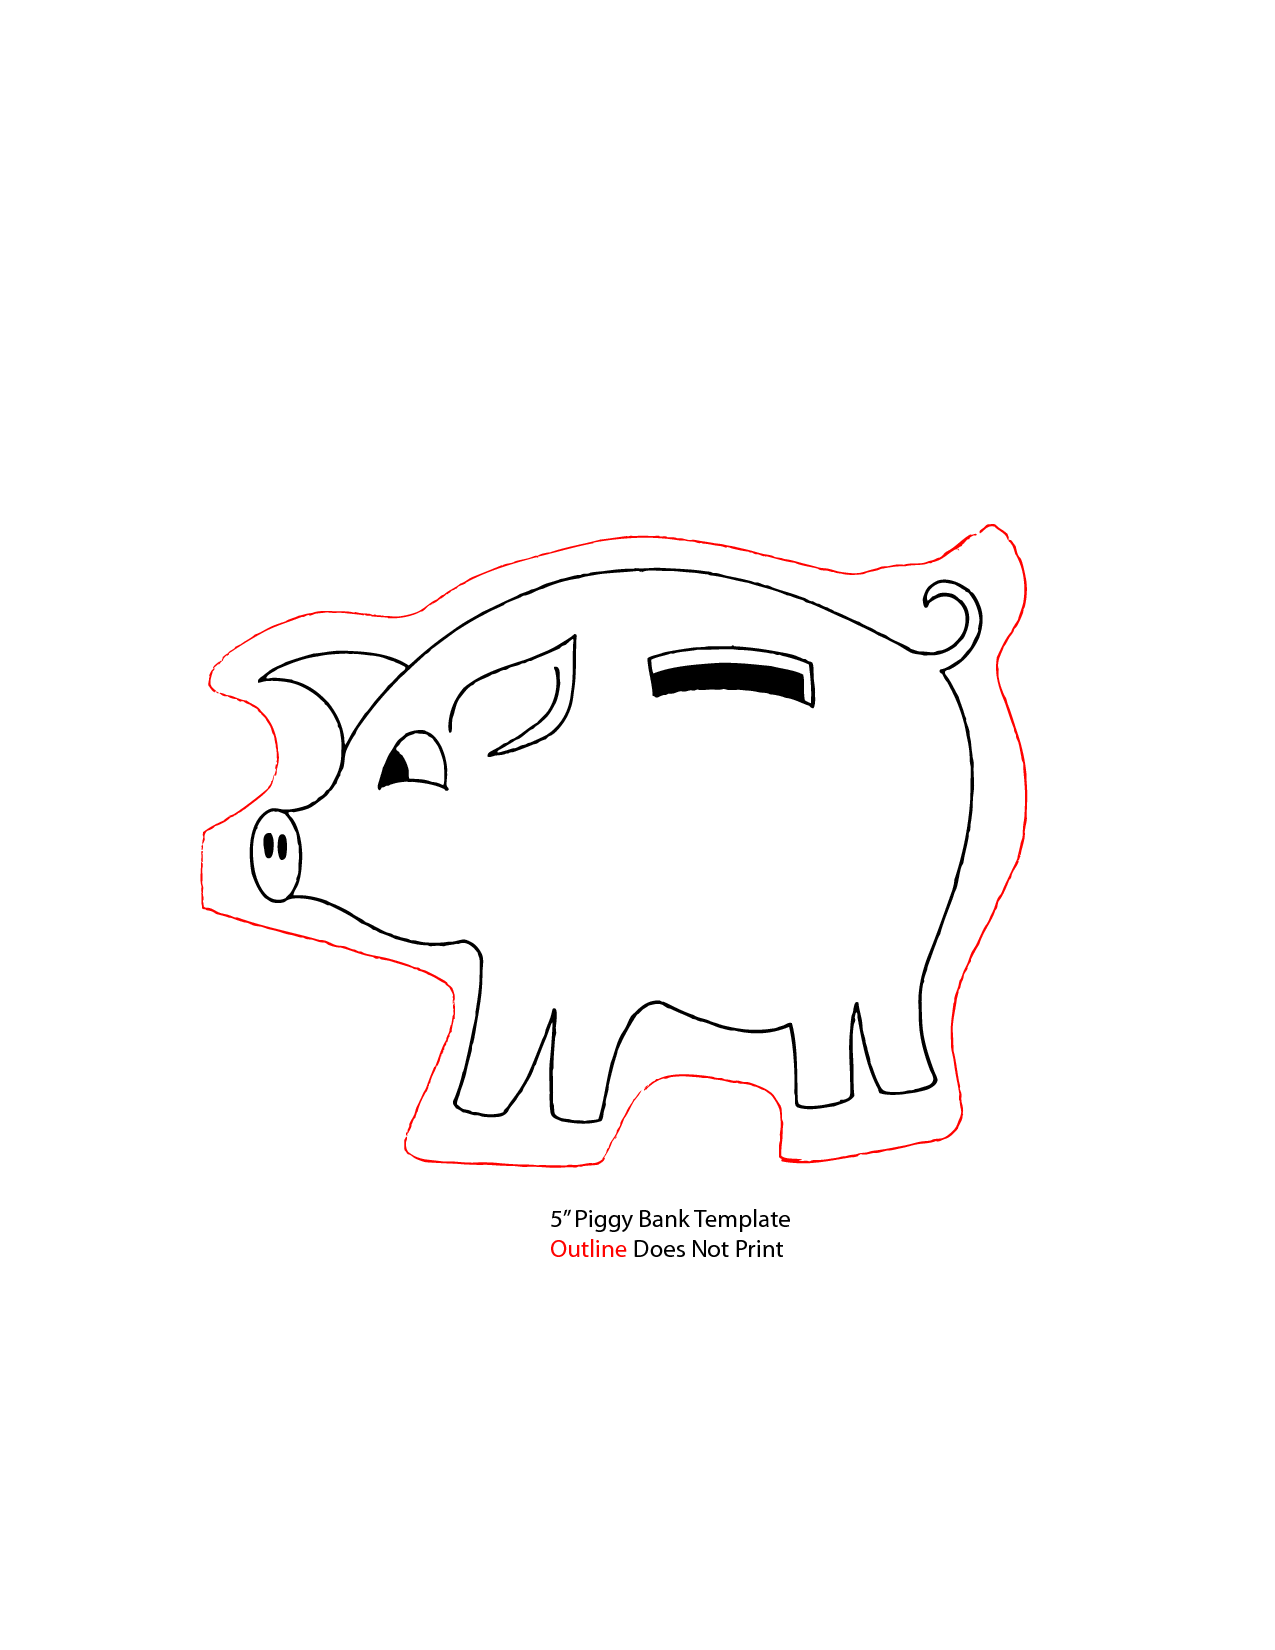 Piggy Bank Template Printable Images & Pictures - Becuo